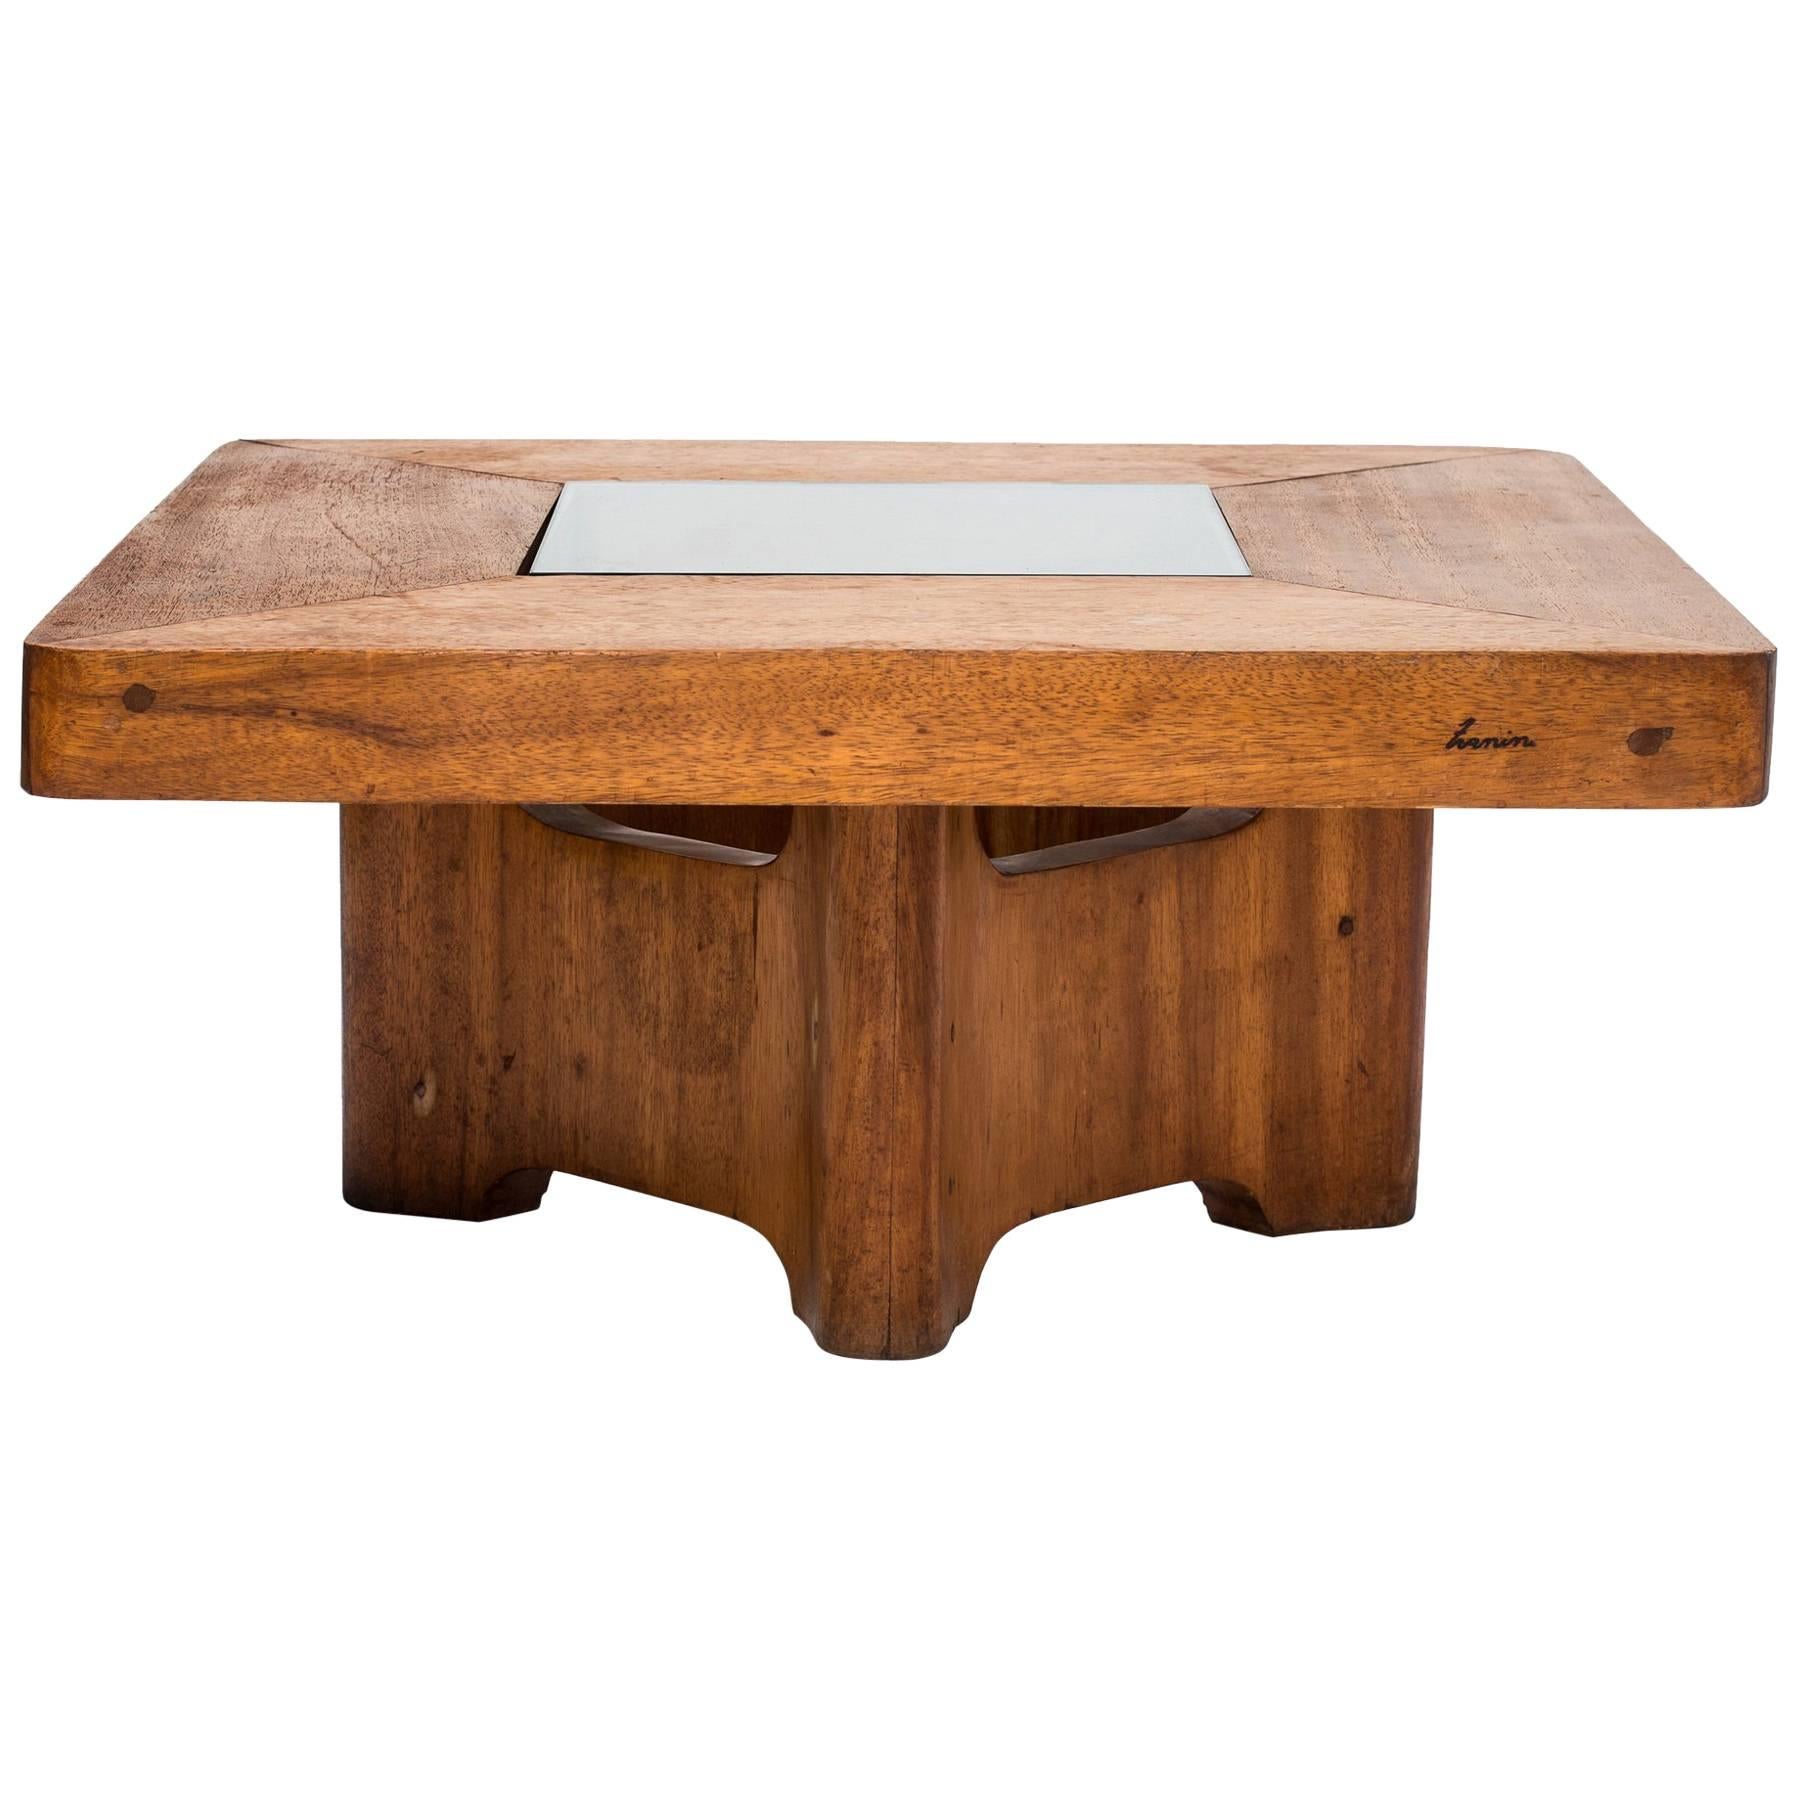 Center Table Carved in Hardwood by Zanine Caldas